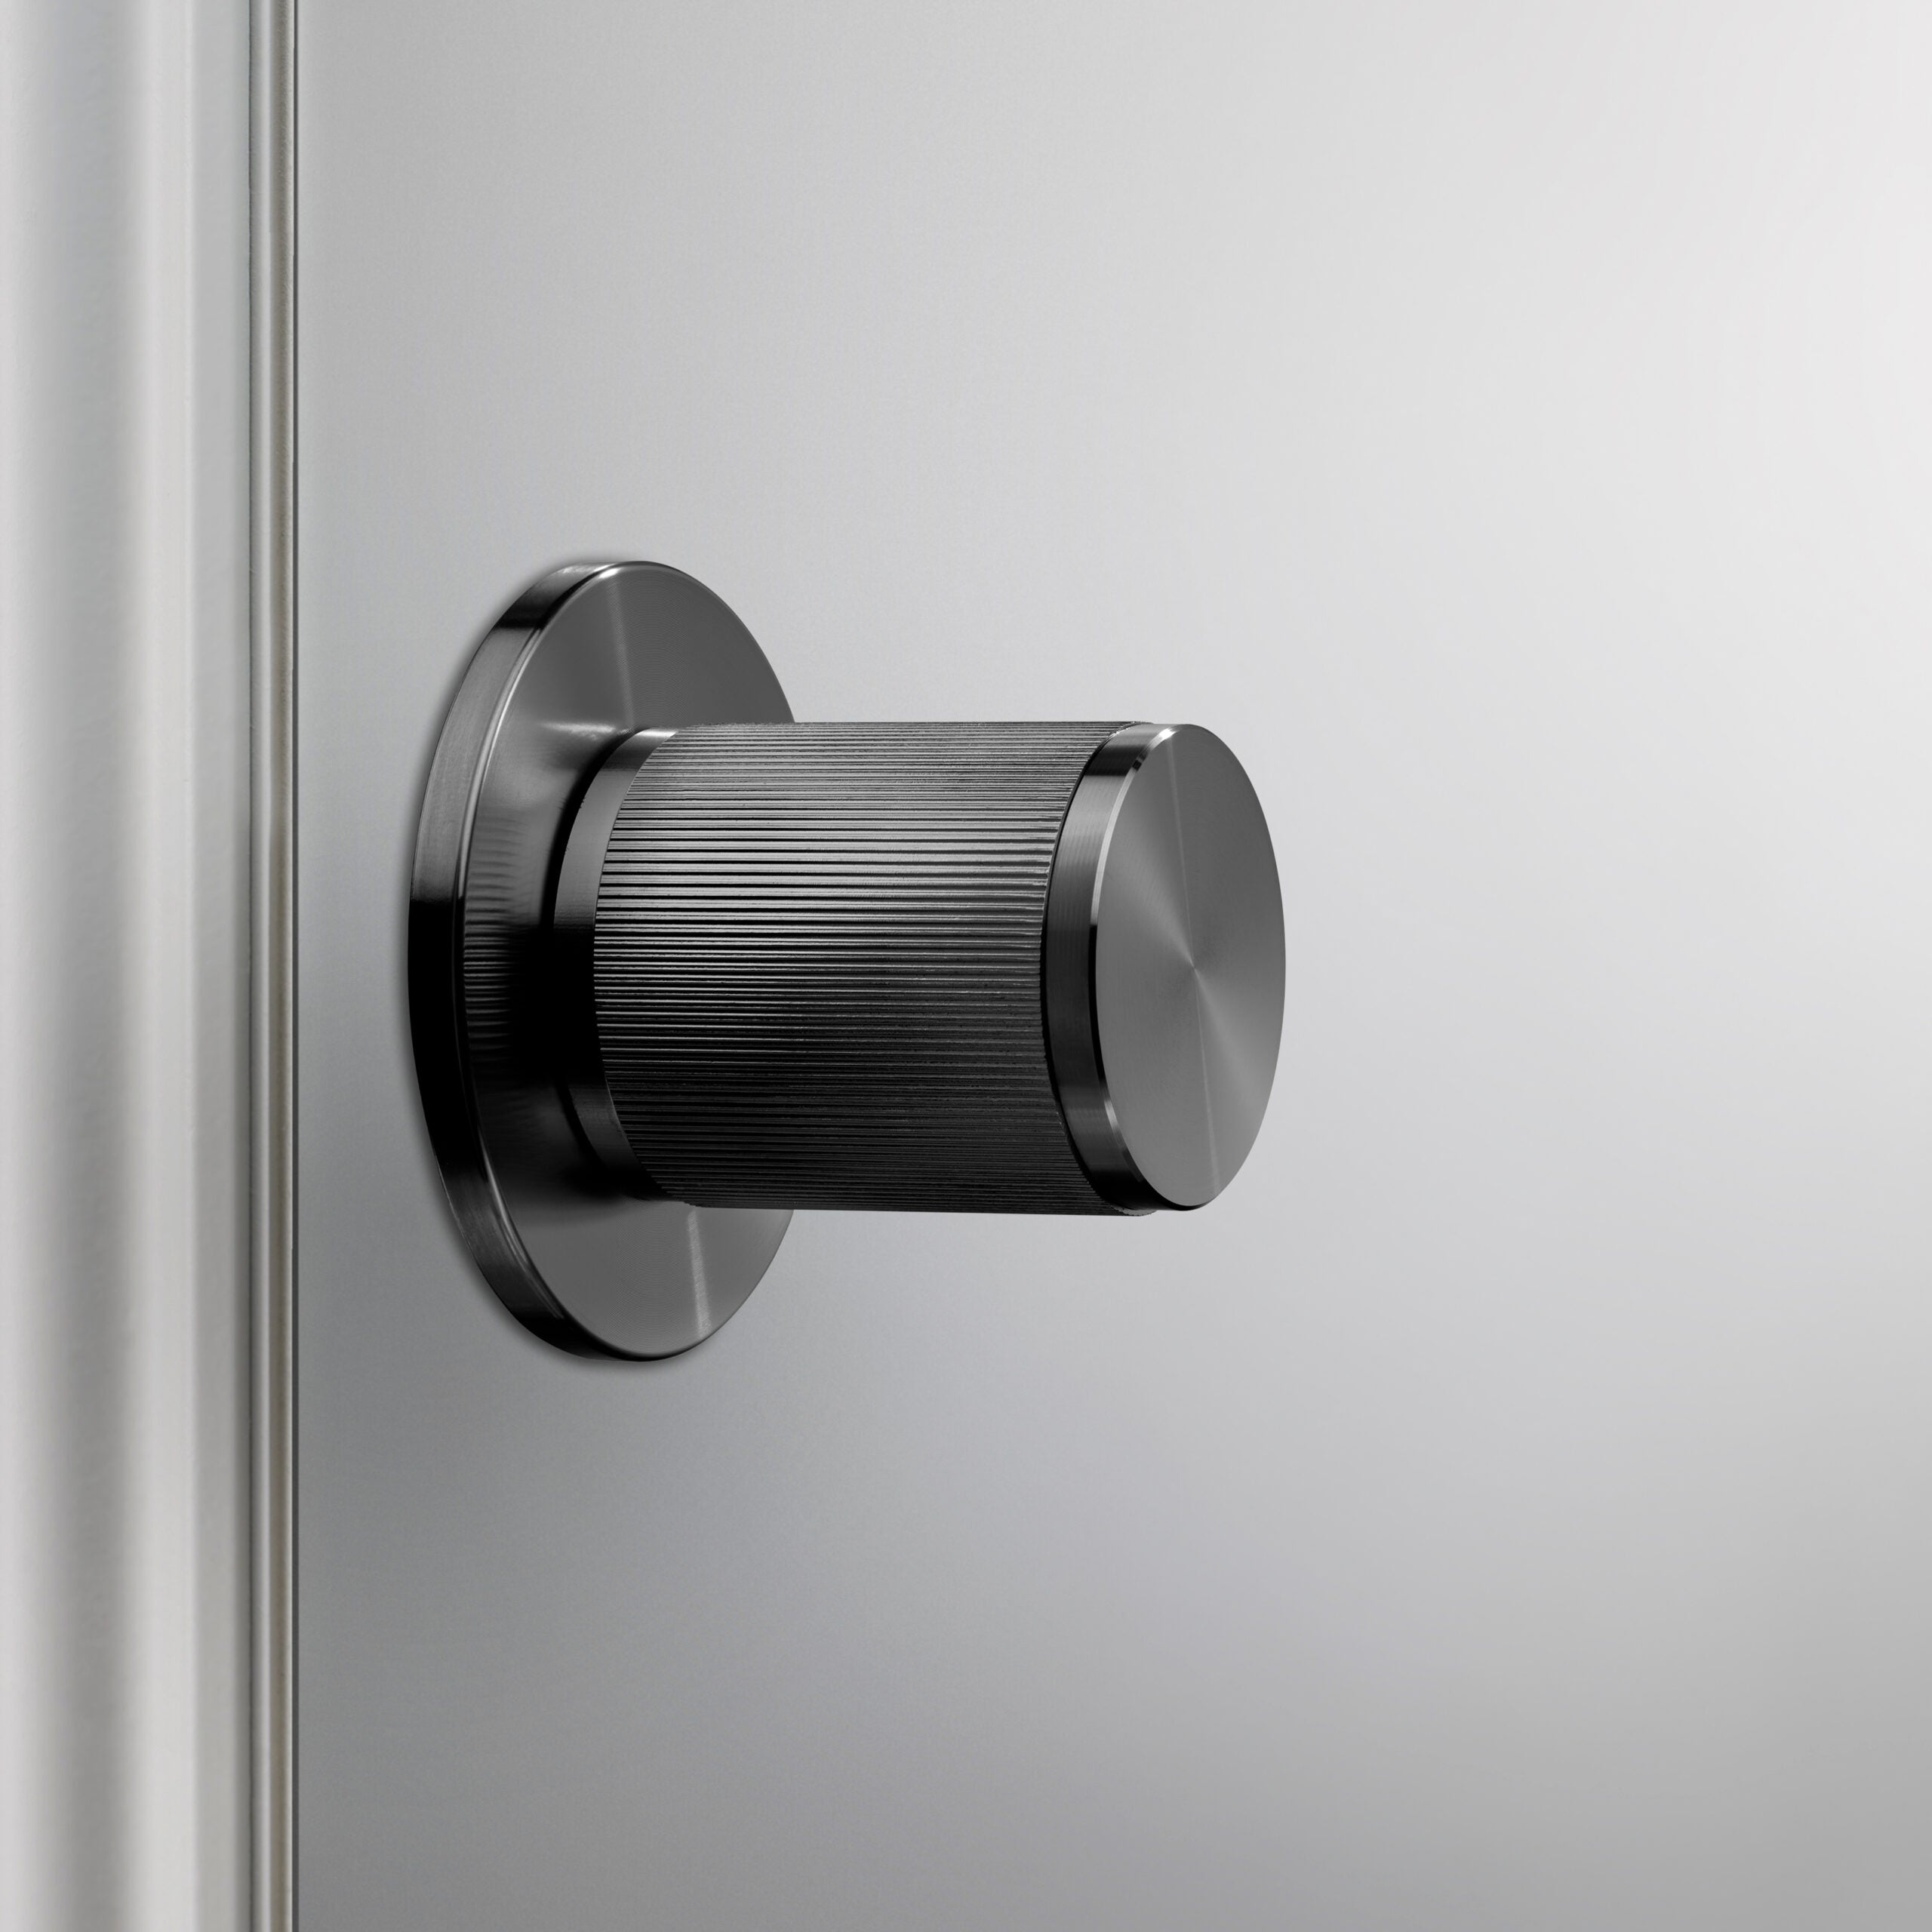 Buster + Punch Door Knob Single Sided, Linear Design, FIXED TYPE